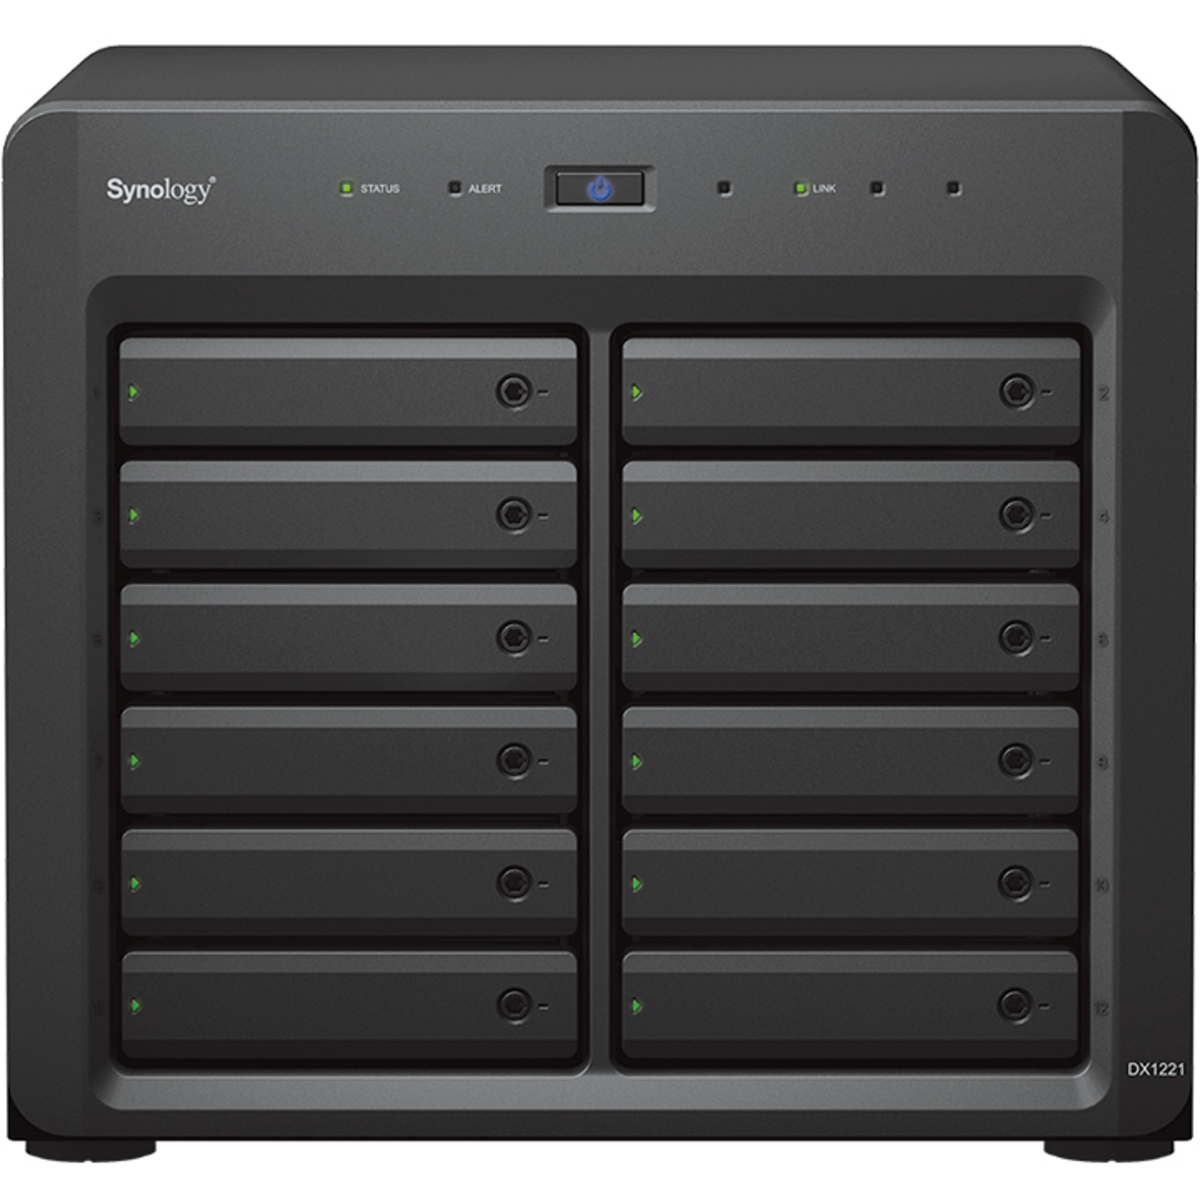 Synology DX1222 External Expansion Drive 80tb 12-Bay Desktop Multimedia / Power User / Business Expansion Enclosure 10x8tb Western Digital Red Pro WD8003FFBX 3.5 7200rpm SATA 6Gb/s HDD NAS Class Drives Installed - Burn-In Tested DX1222 External Expansion Drive